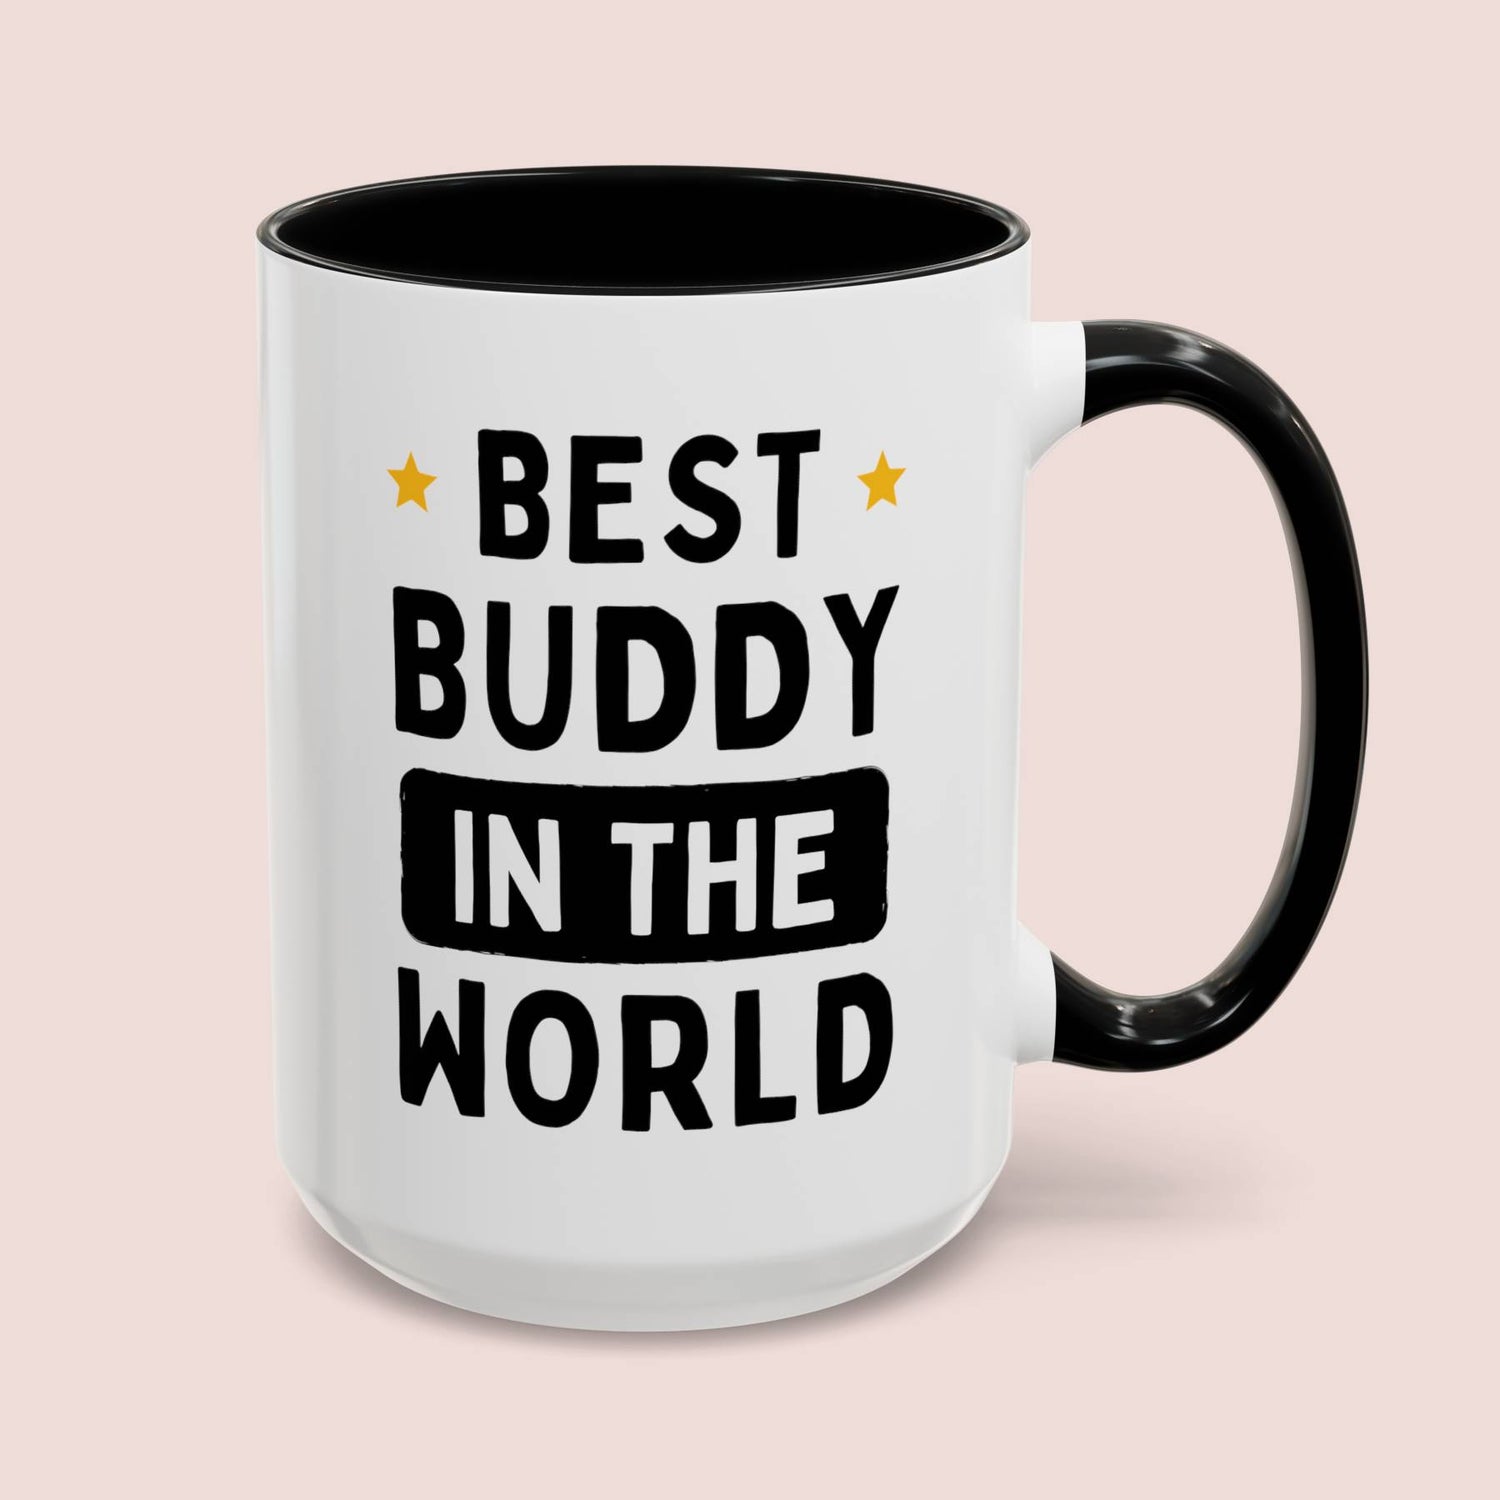 Best Buddy In The World 15oz white with black accent funny large coffee mug gift for friend dad mentor BFF BBF ever waveywares wavey wares wavywares wavy wares cover